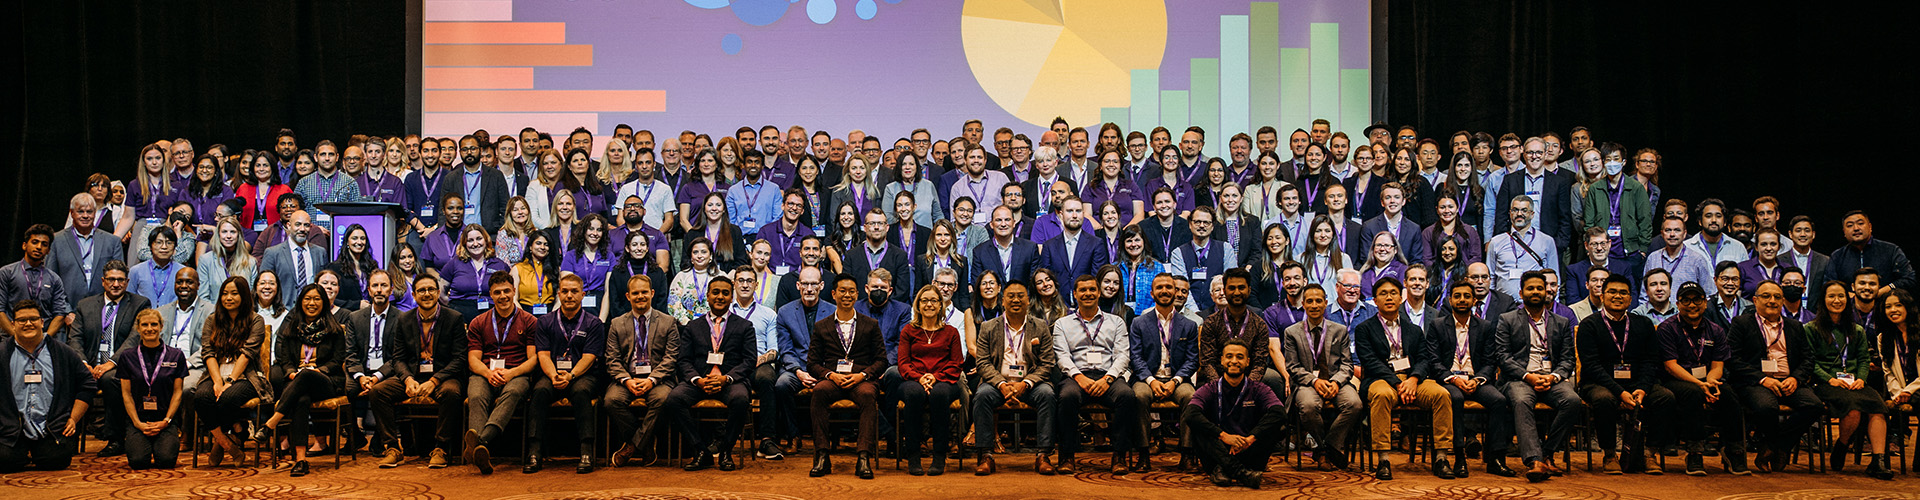 Group photo of Environics Analytics staff at the 16th Annual User Conference in September 2022